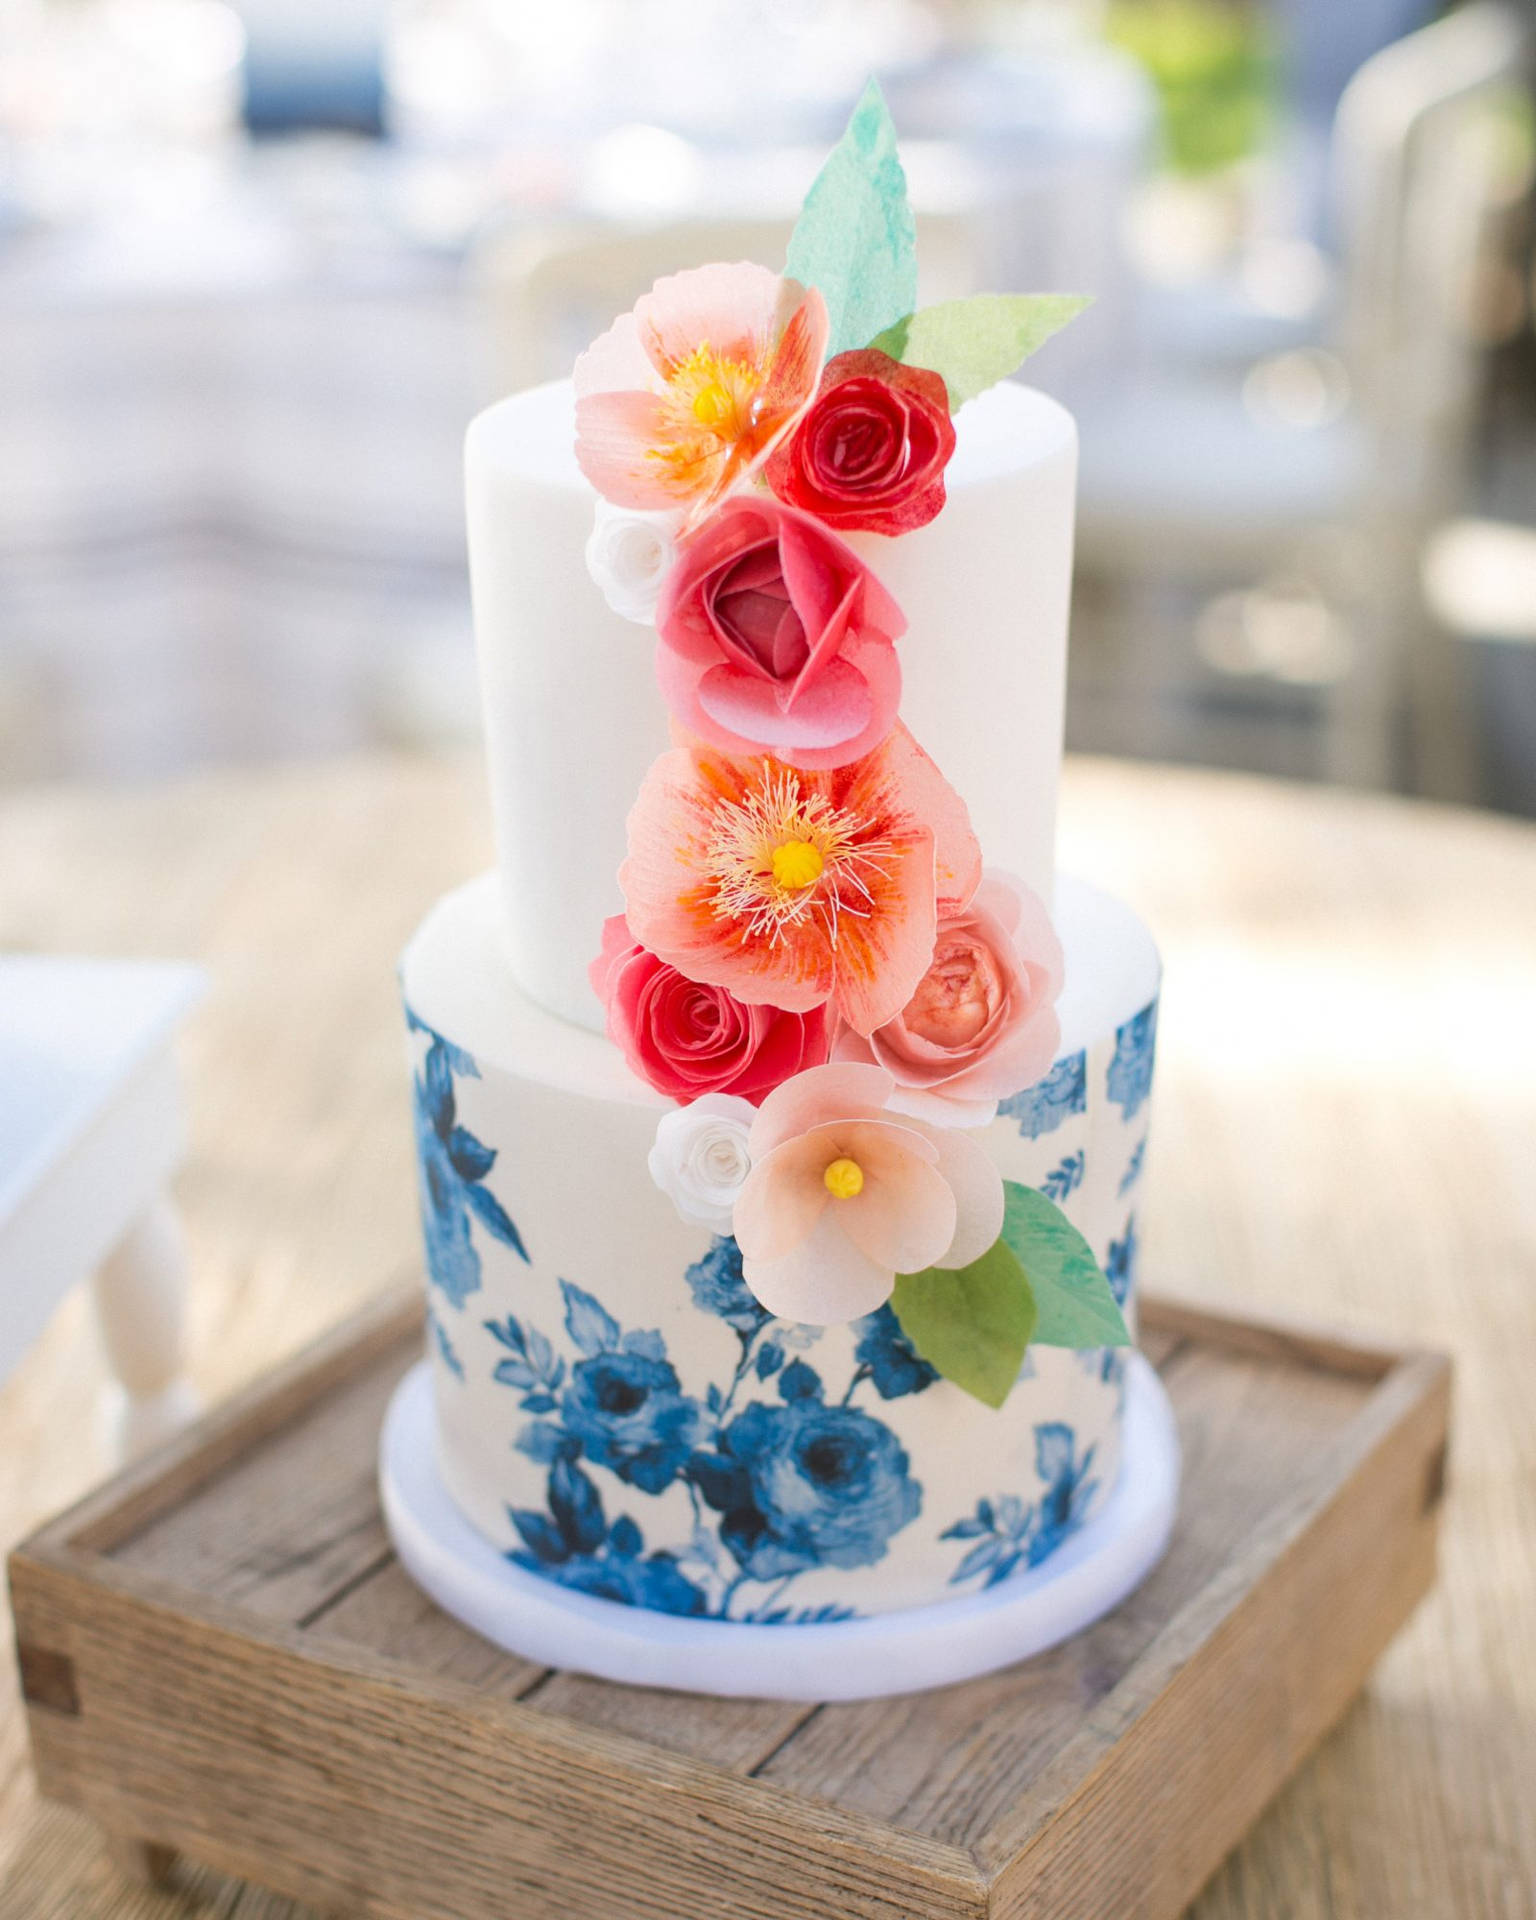 Creatively Painted Wedding Cake With Flowers Wallpaper